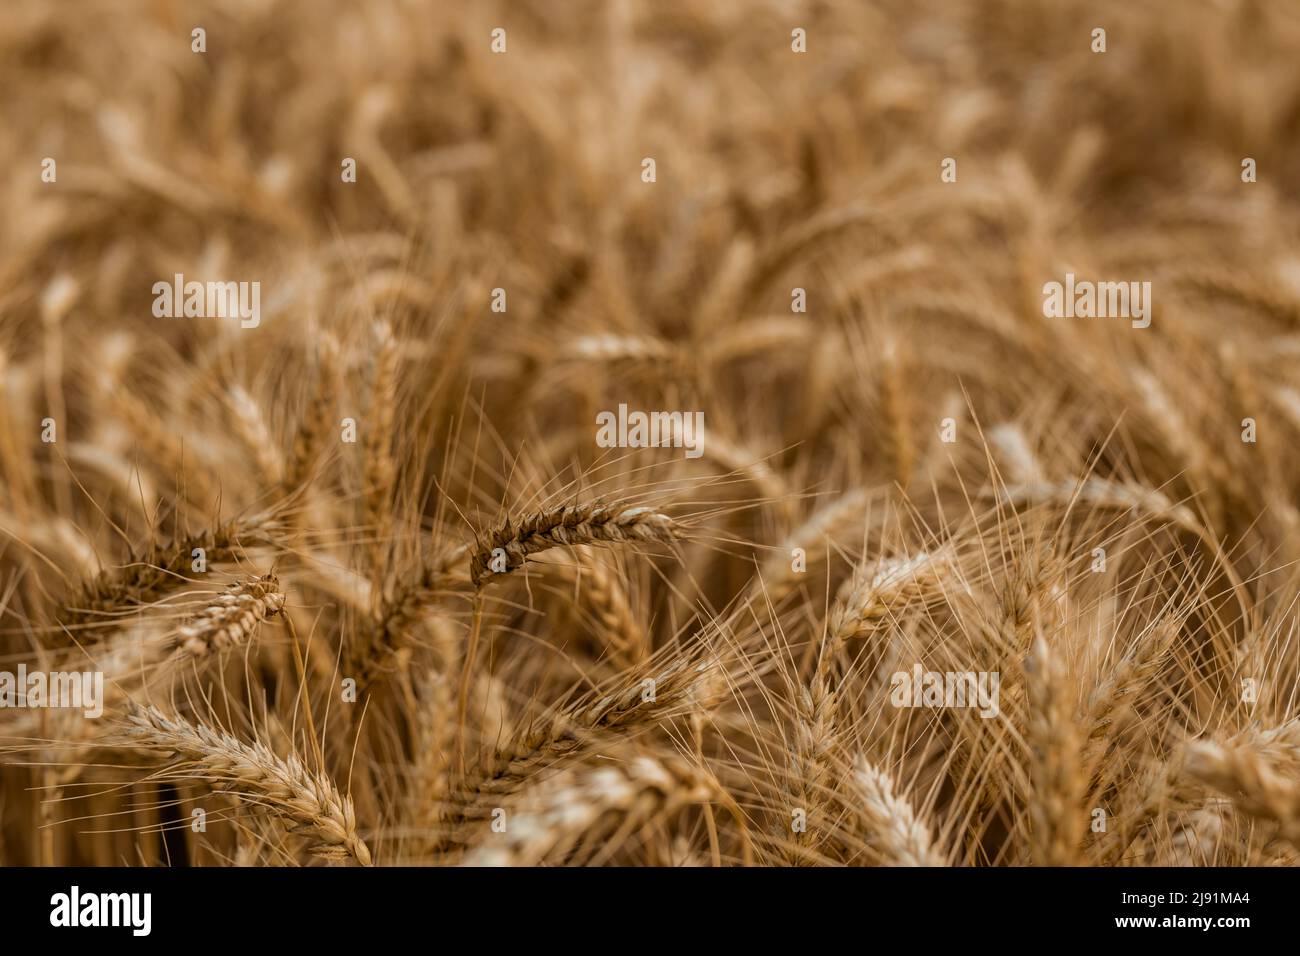 The backdrop of ripening ears of the yellow wheat field.Rich harvest Concept. Wheat field with ears of golden wheat close up. Beautiful Agricultural Stock Photo